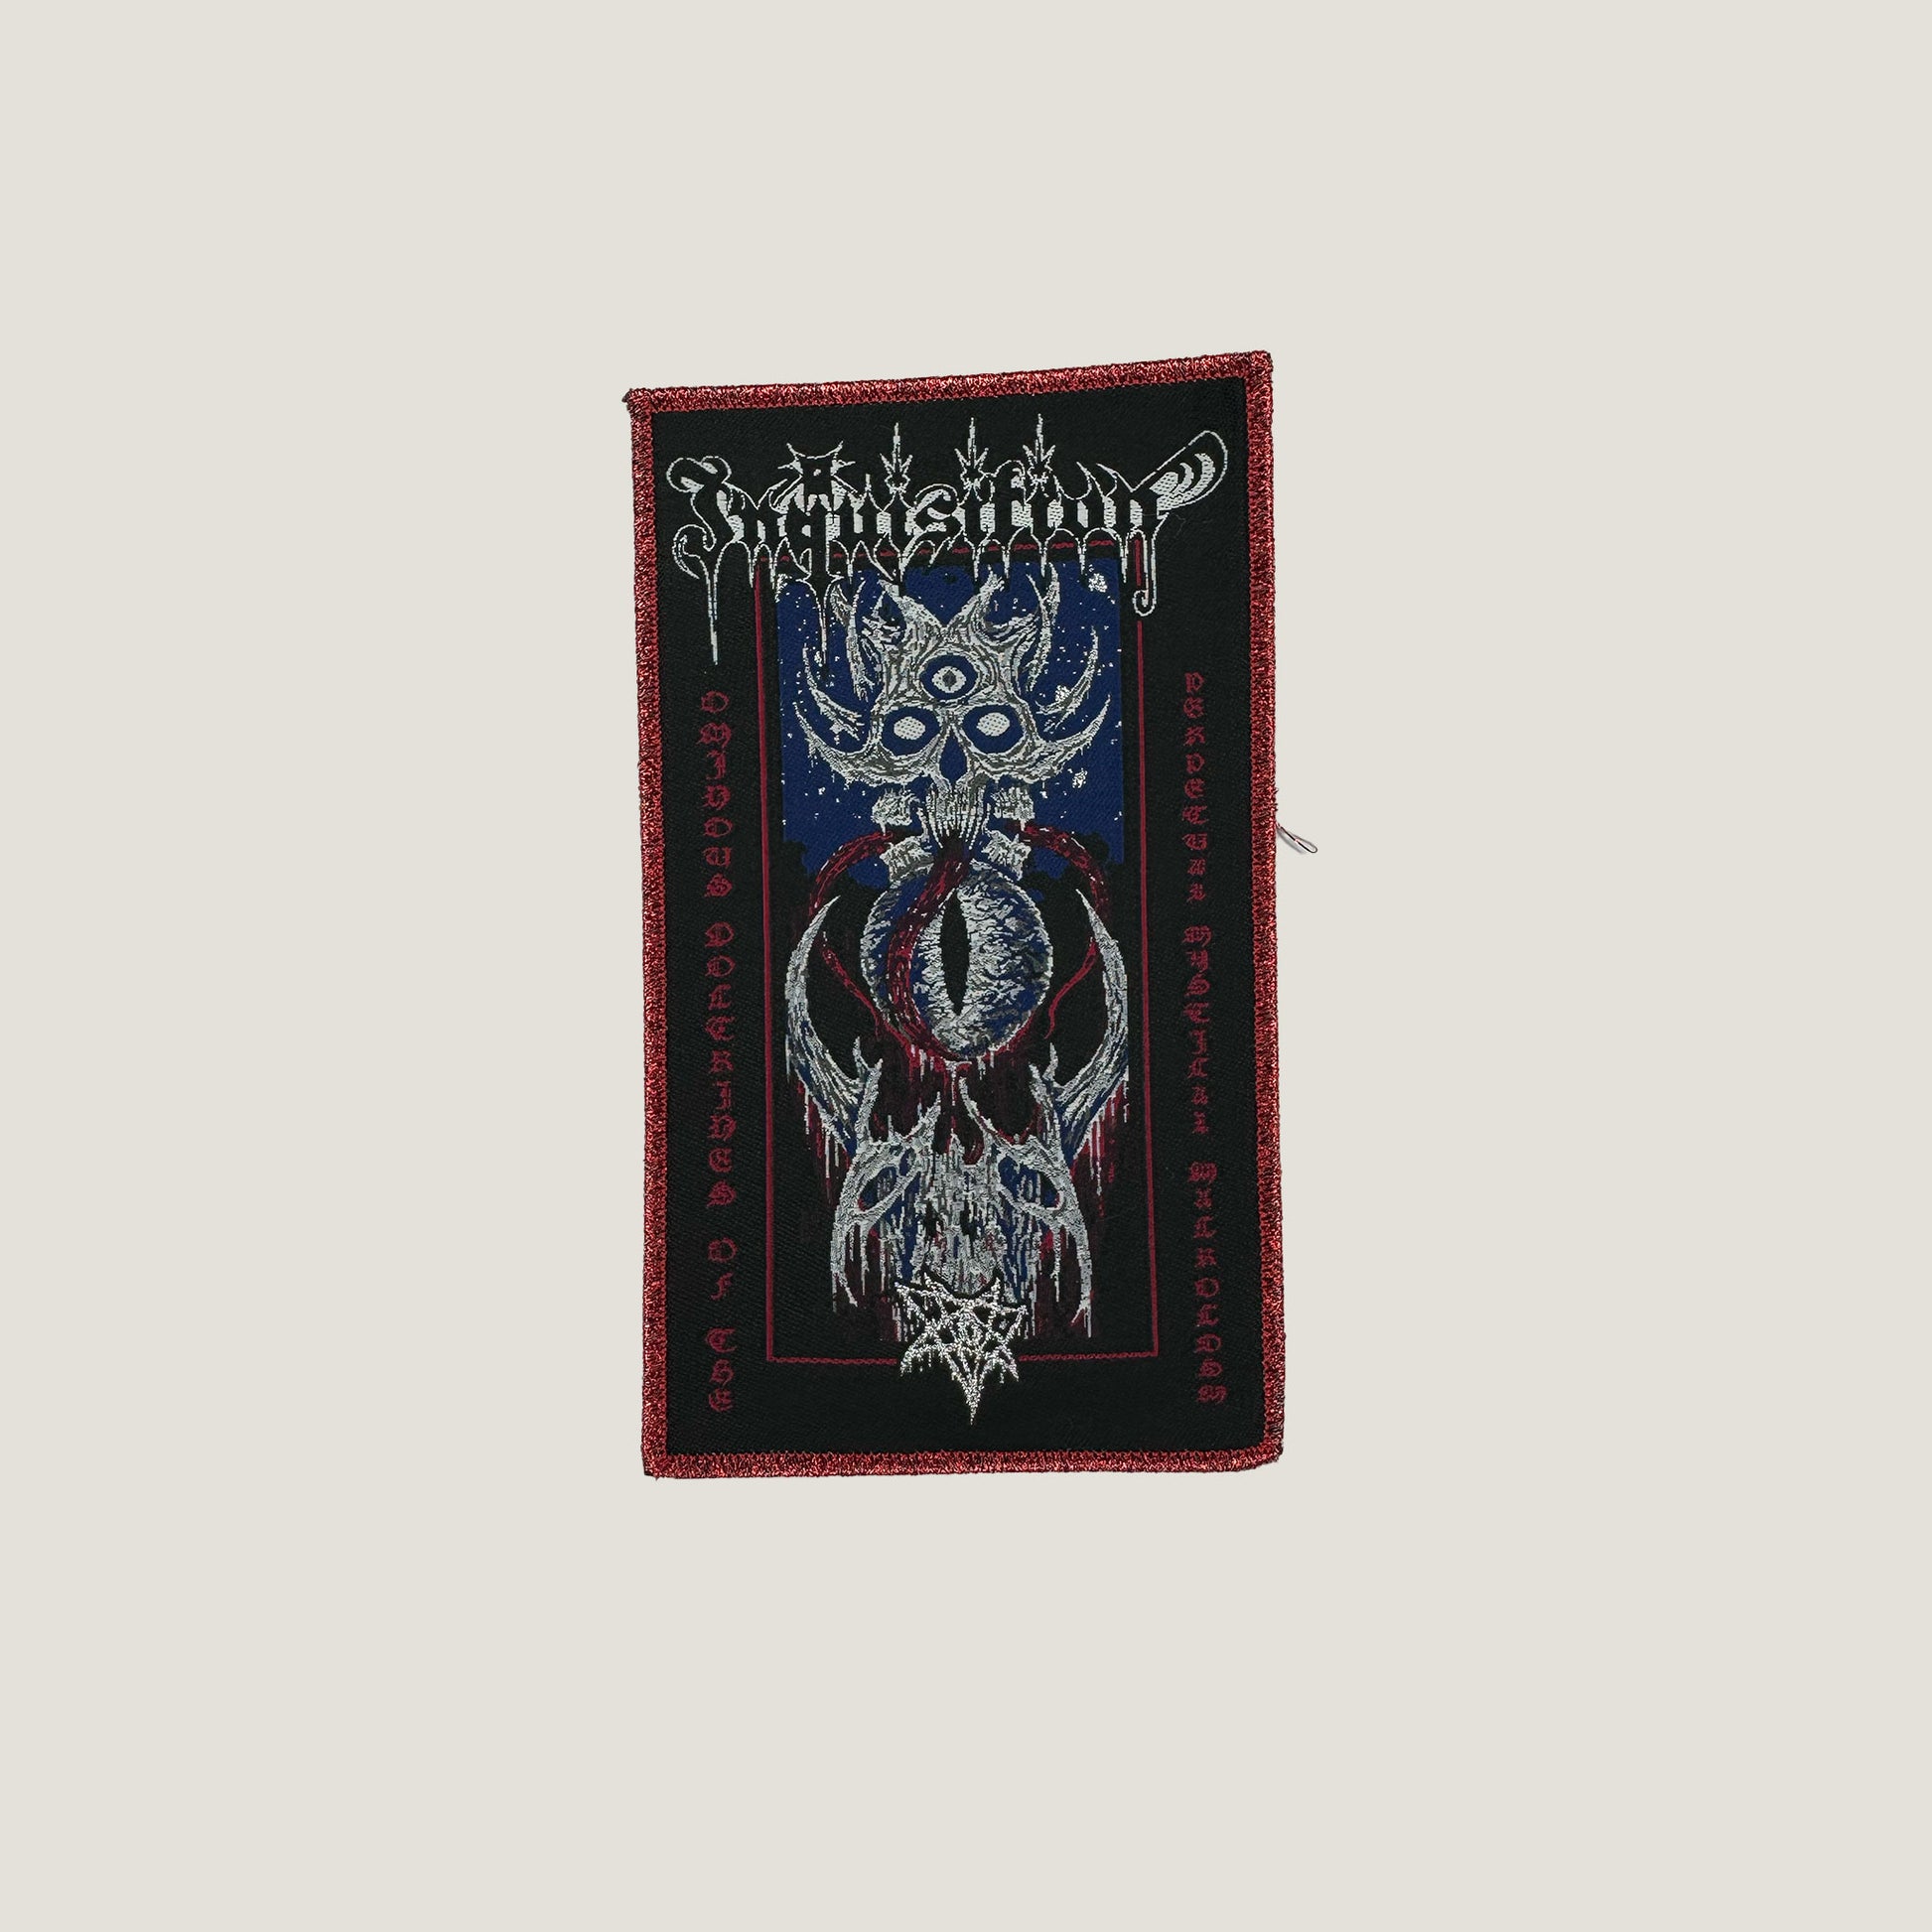 Temporal Dimensions Patches Inquisition Ominous Doctrines of the Perpetual Mystical Macrocosm Red Glitter Border Woven Patch